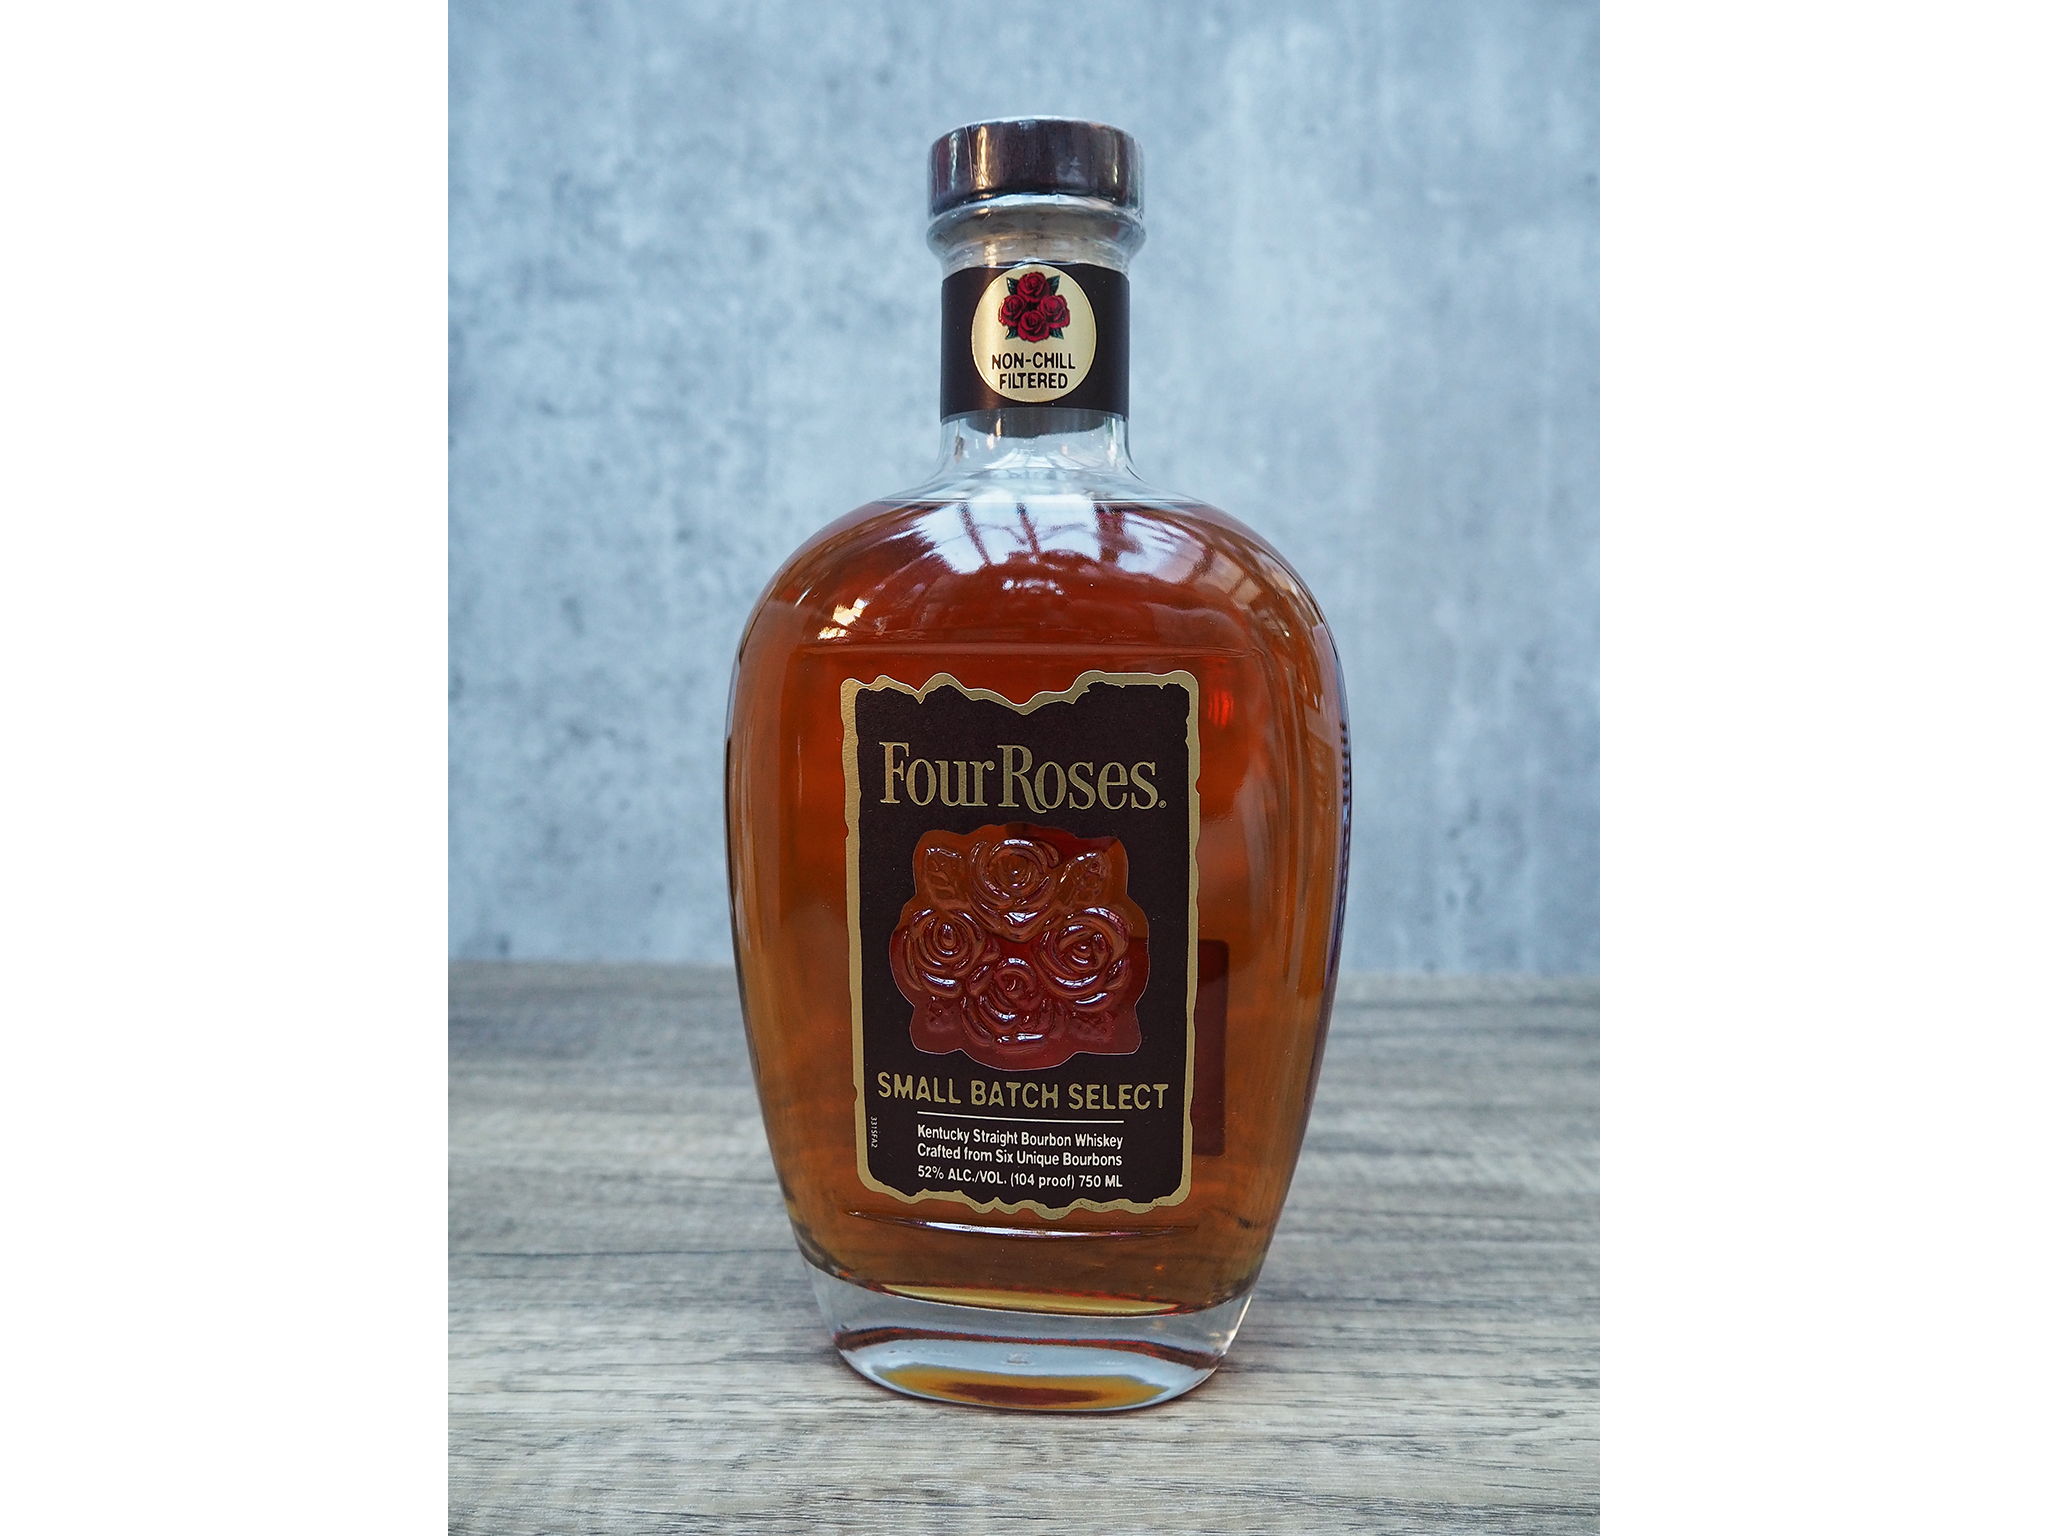 Four Roses small batch select